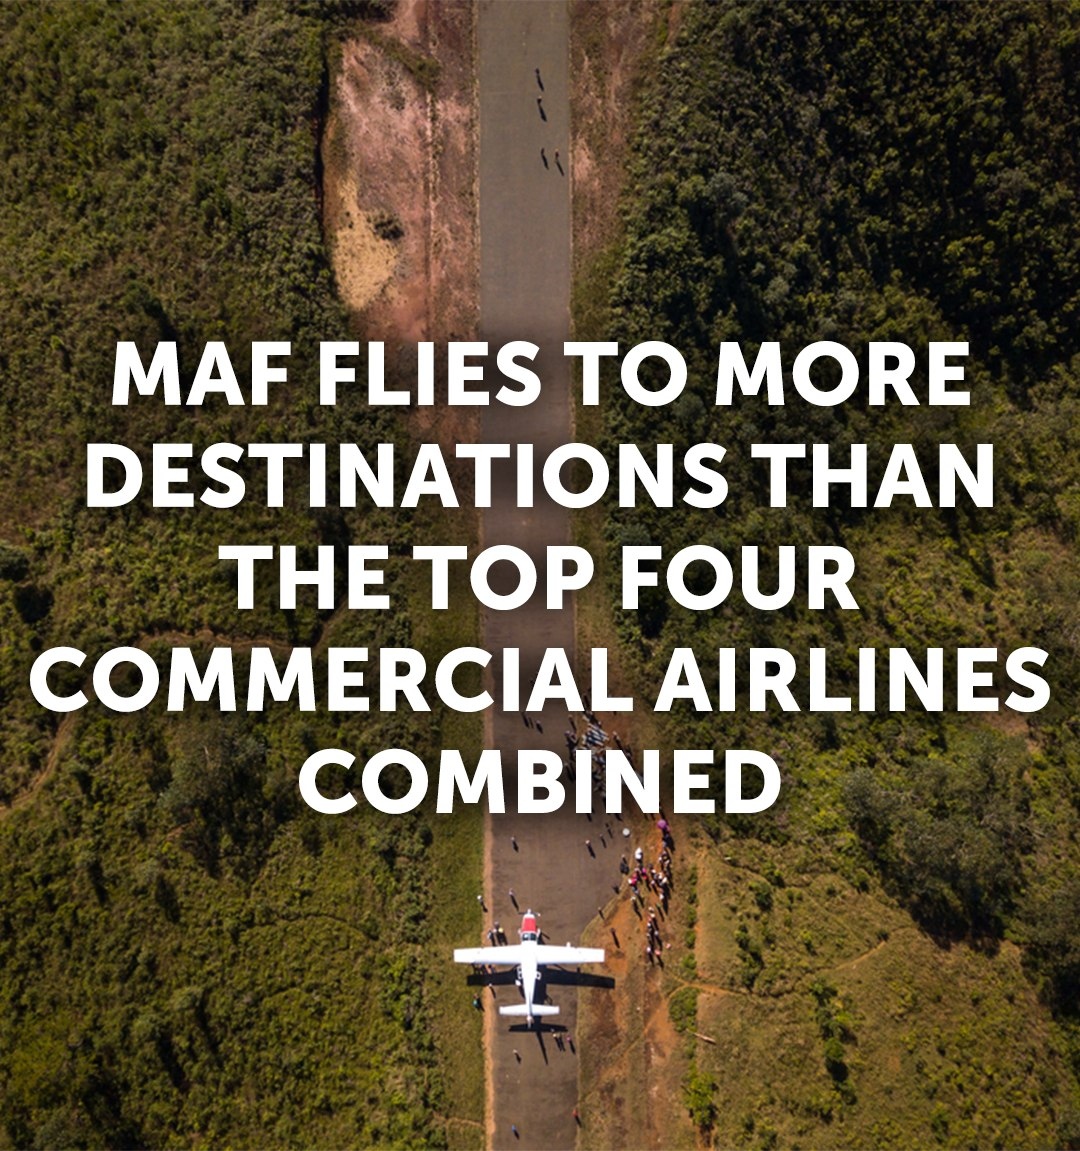 #DidYouKnow, #MAF flies to more destinations than the top 4 American airlines combined? 🗺️
 
MAF is the world's largest #humanitarian air operator!
Thank you for being a part of our flight crew. 🛩️

📍 #Madagascar
📷 Mark and Kelly Hewes
#MAFSA #WeFlyWhereRoadsEnd #iFlyMAF #MAFUK